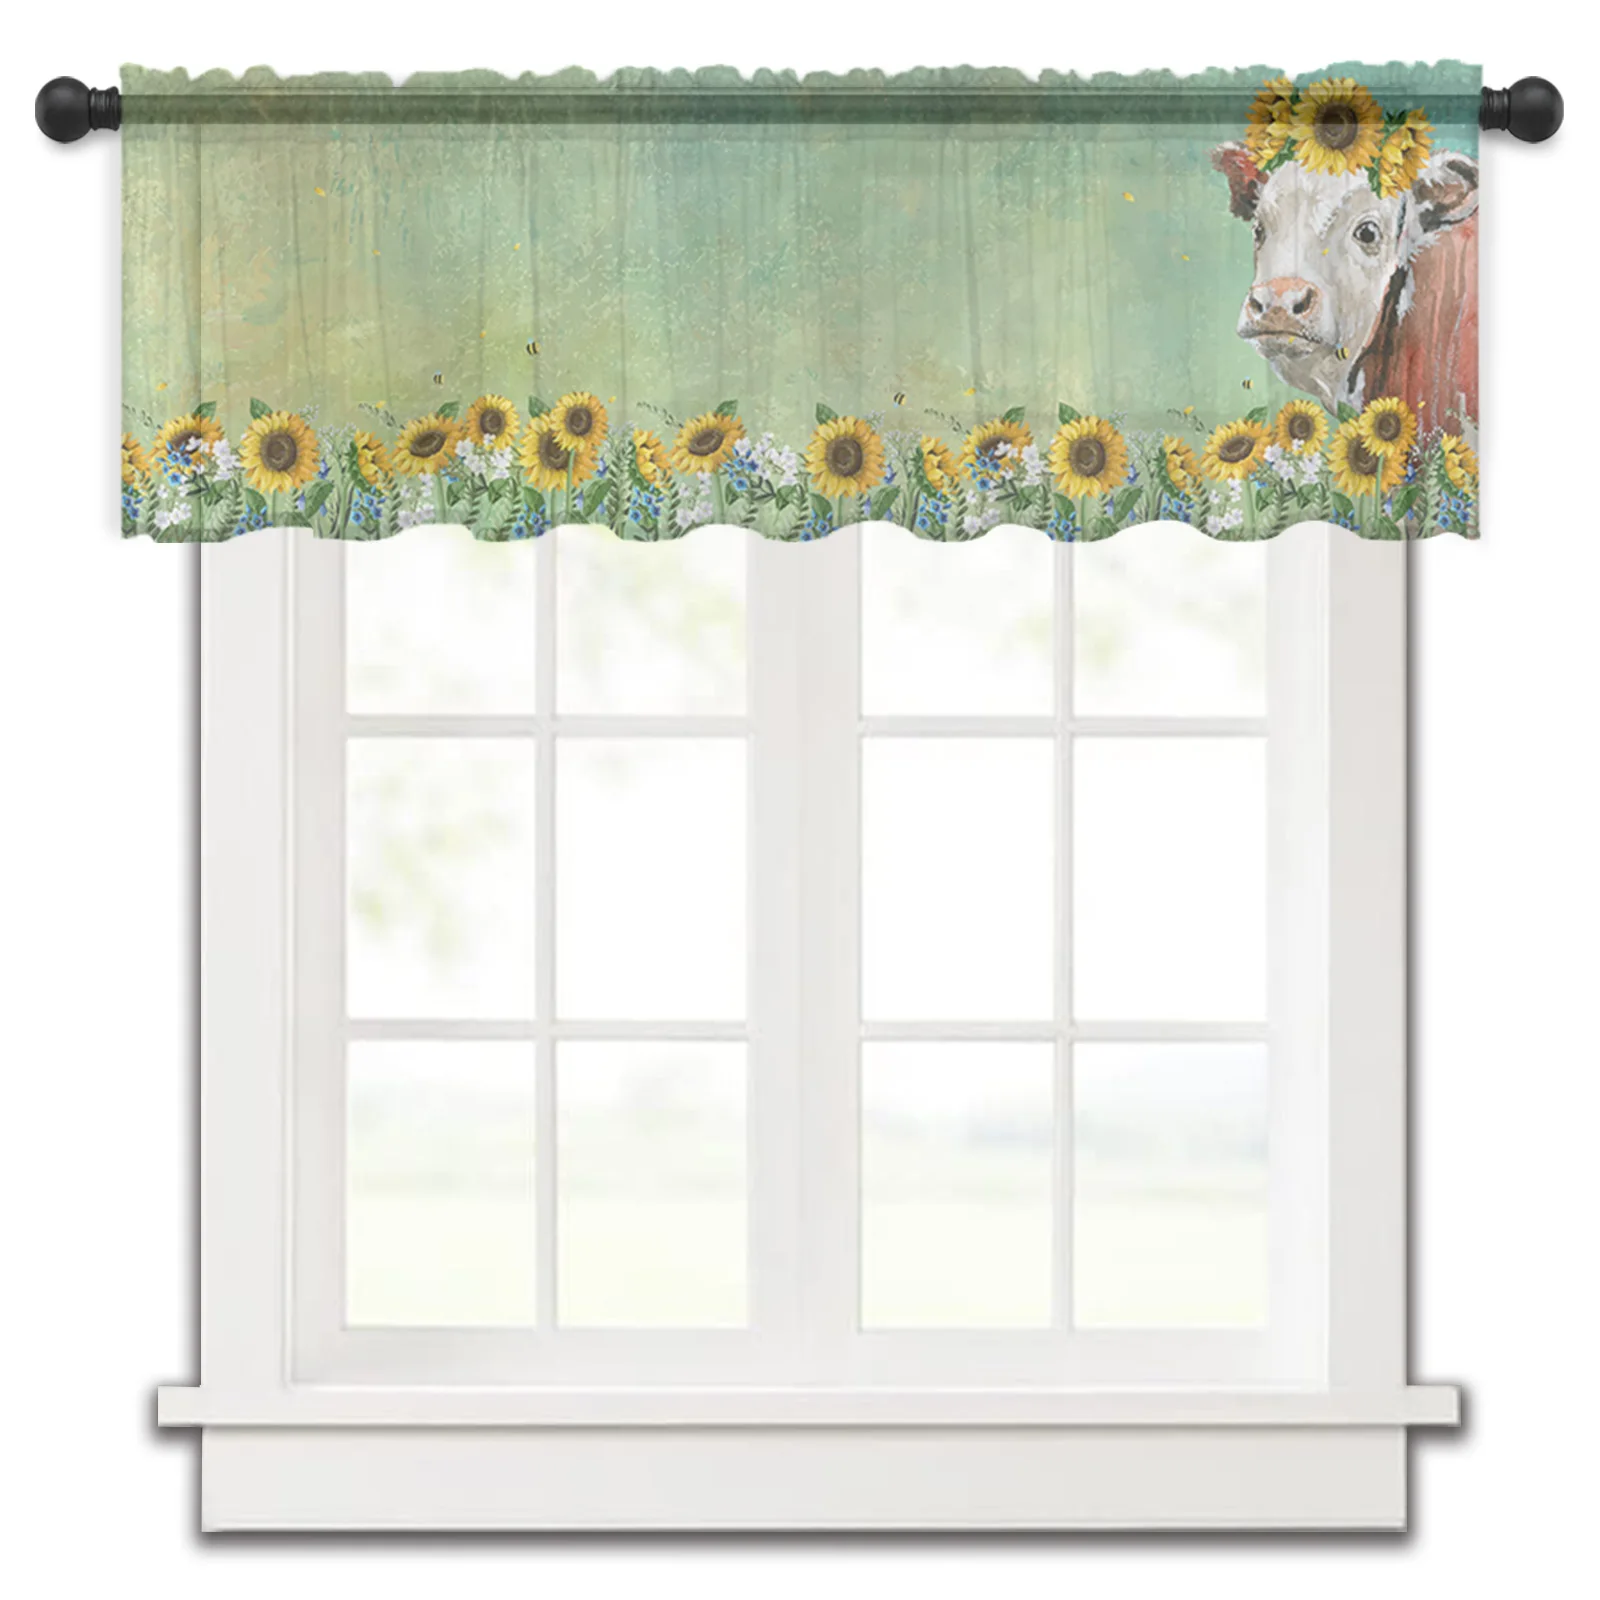 

American Country Style Sunflower Cow Farm Kitchen Curtains Tulle Sheer Short Curtain Bedroom Living Room Home Decor Voile Drapes